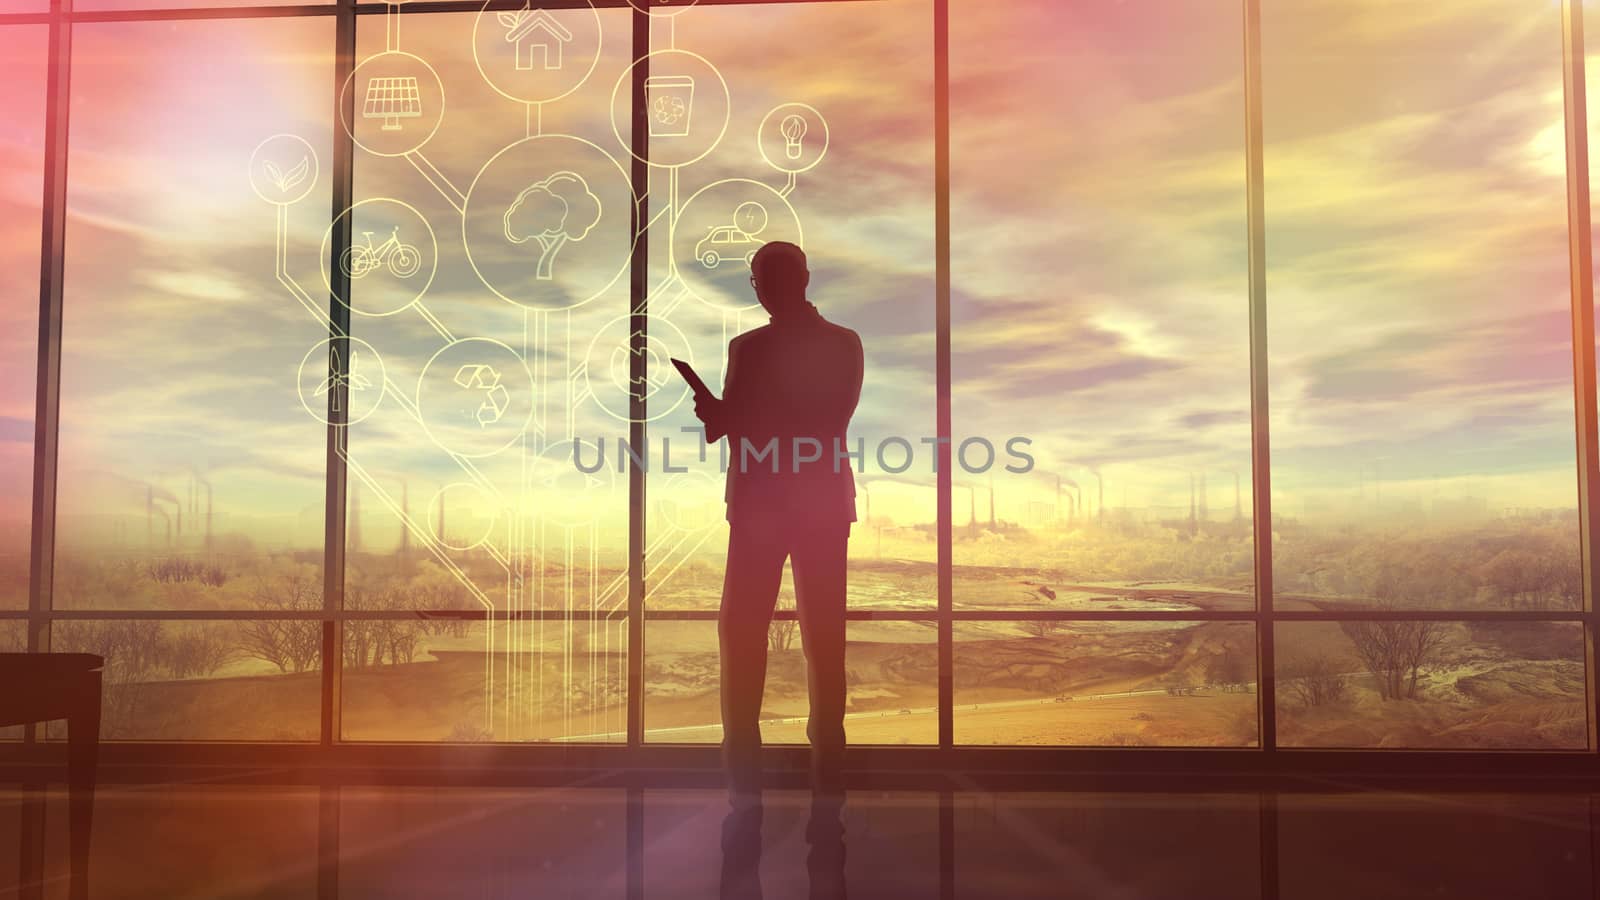 Improve the environmental situation, the silhouette of a man in the office by ConceptCafe